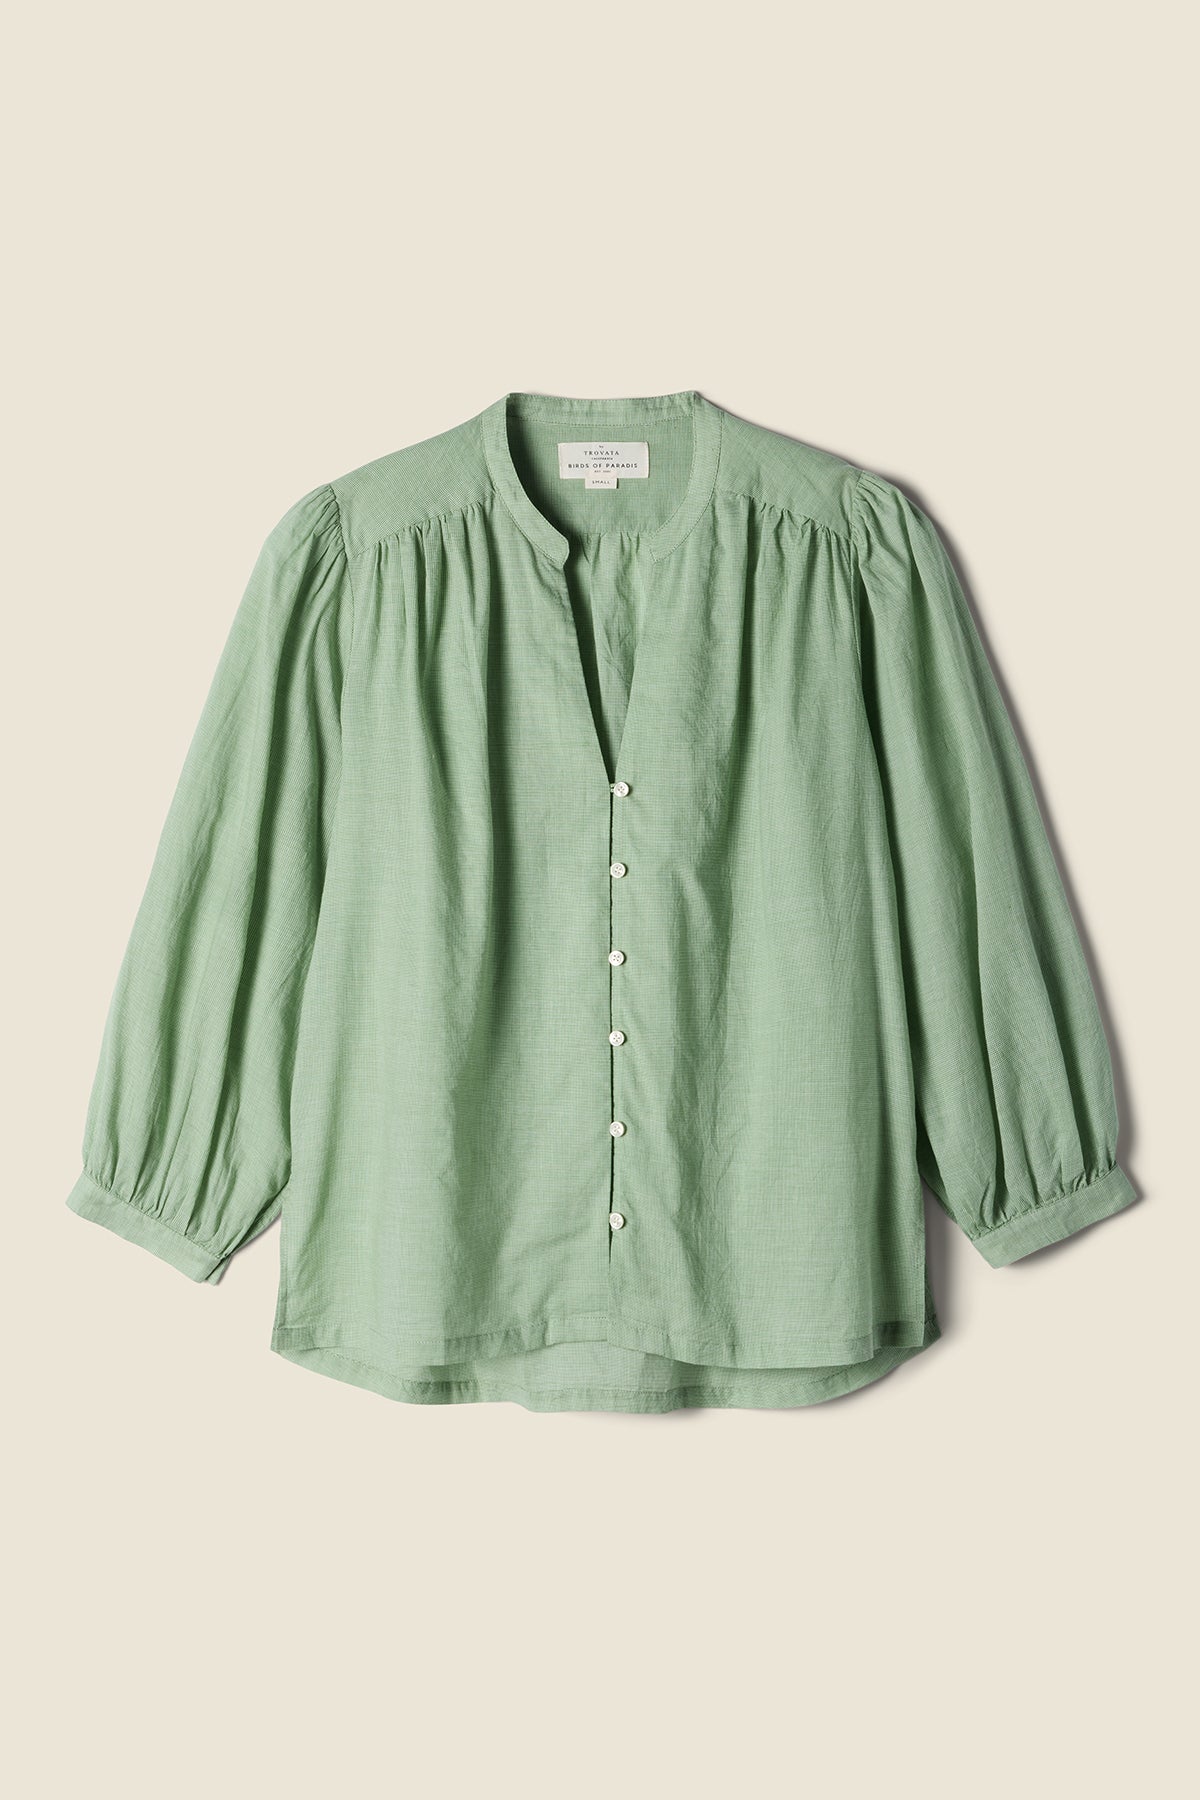 Quincy Blouse Green Houndstooth